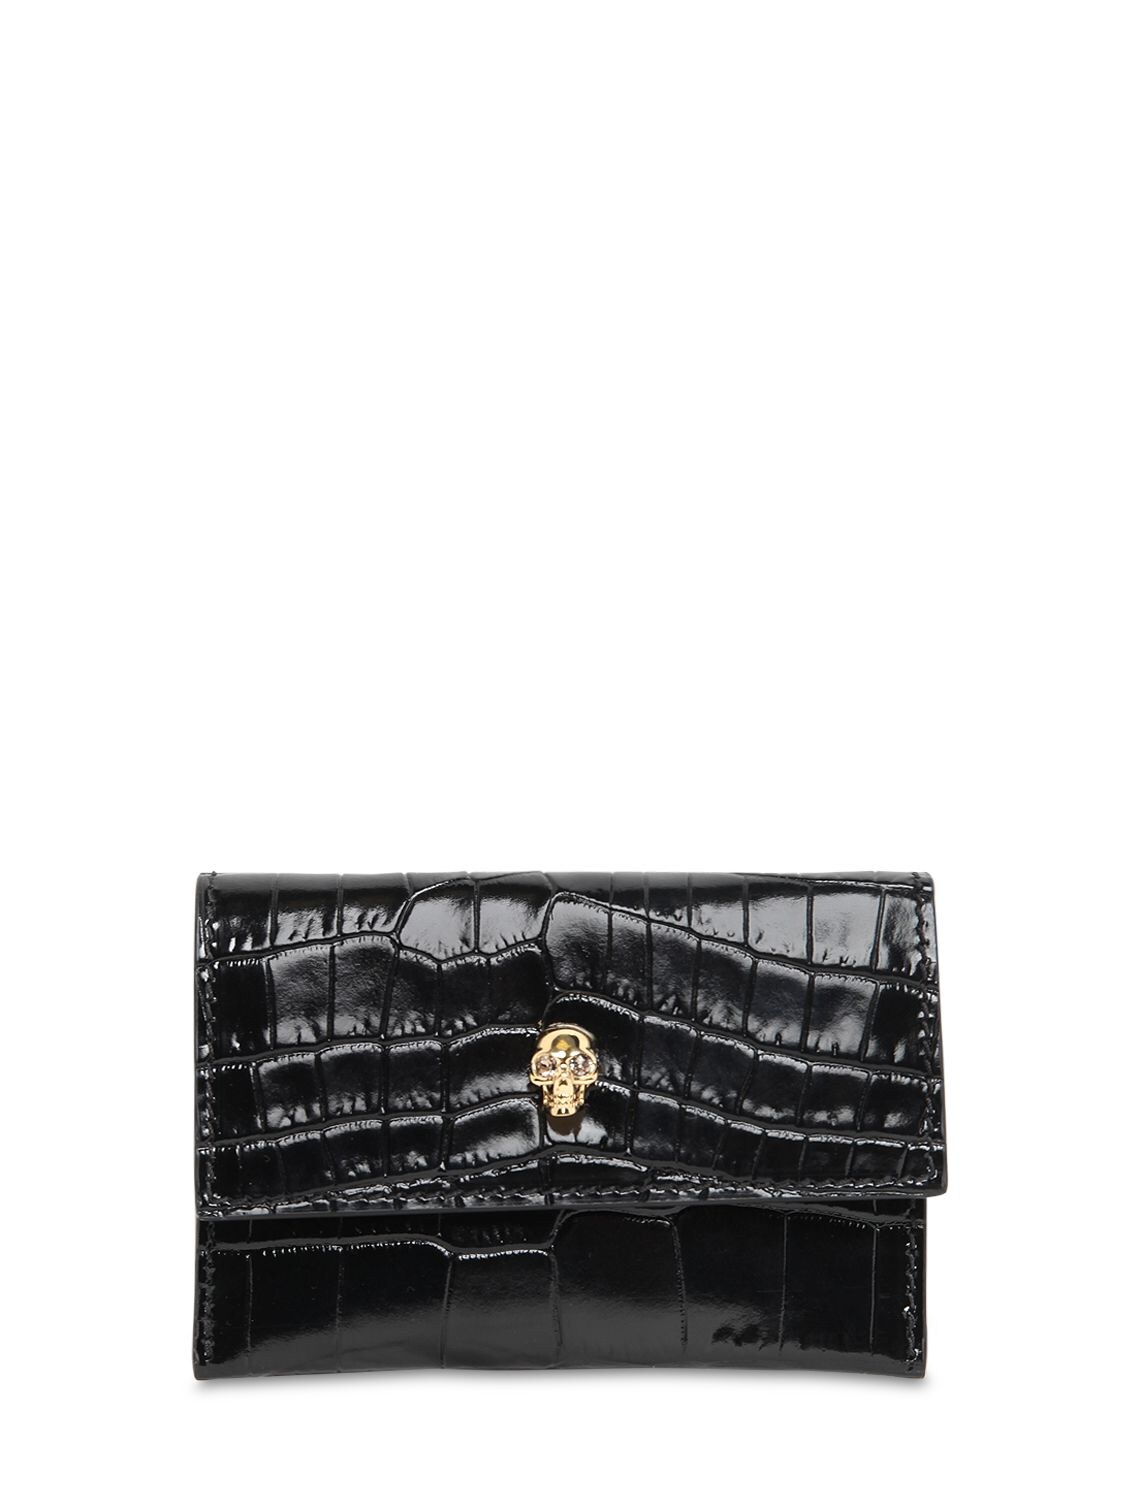 ALEXANDER MCQUEEN CROC EMBOSSED LEATHER CARD HOLDER,72IA8E036-MTAWMA2